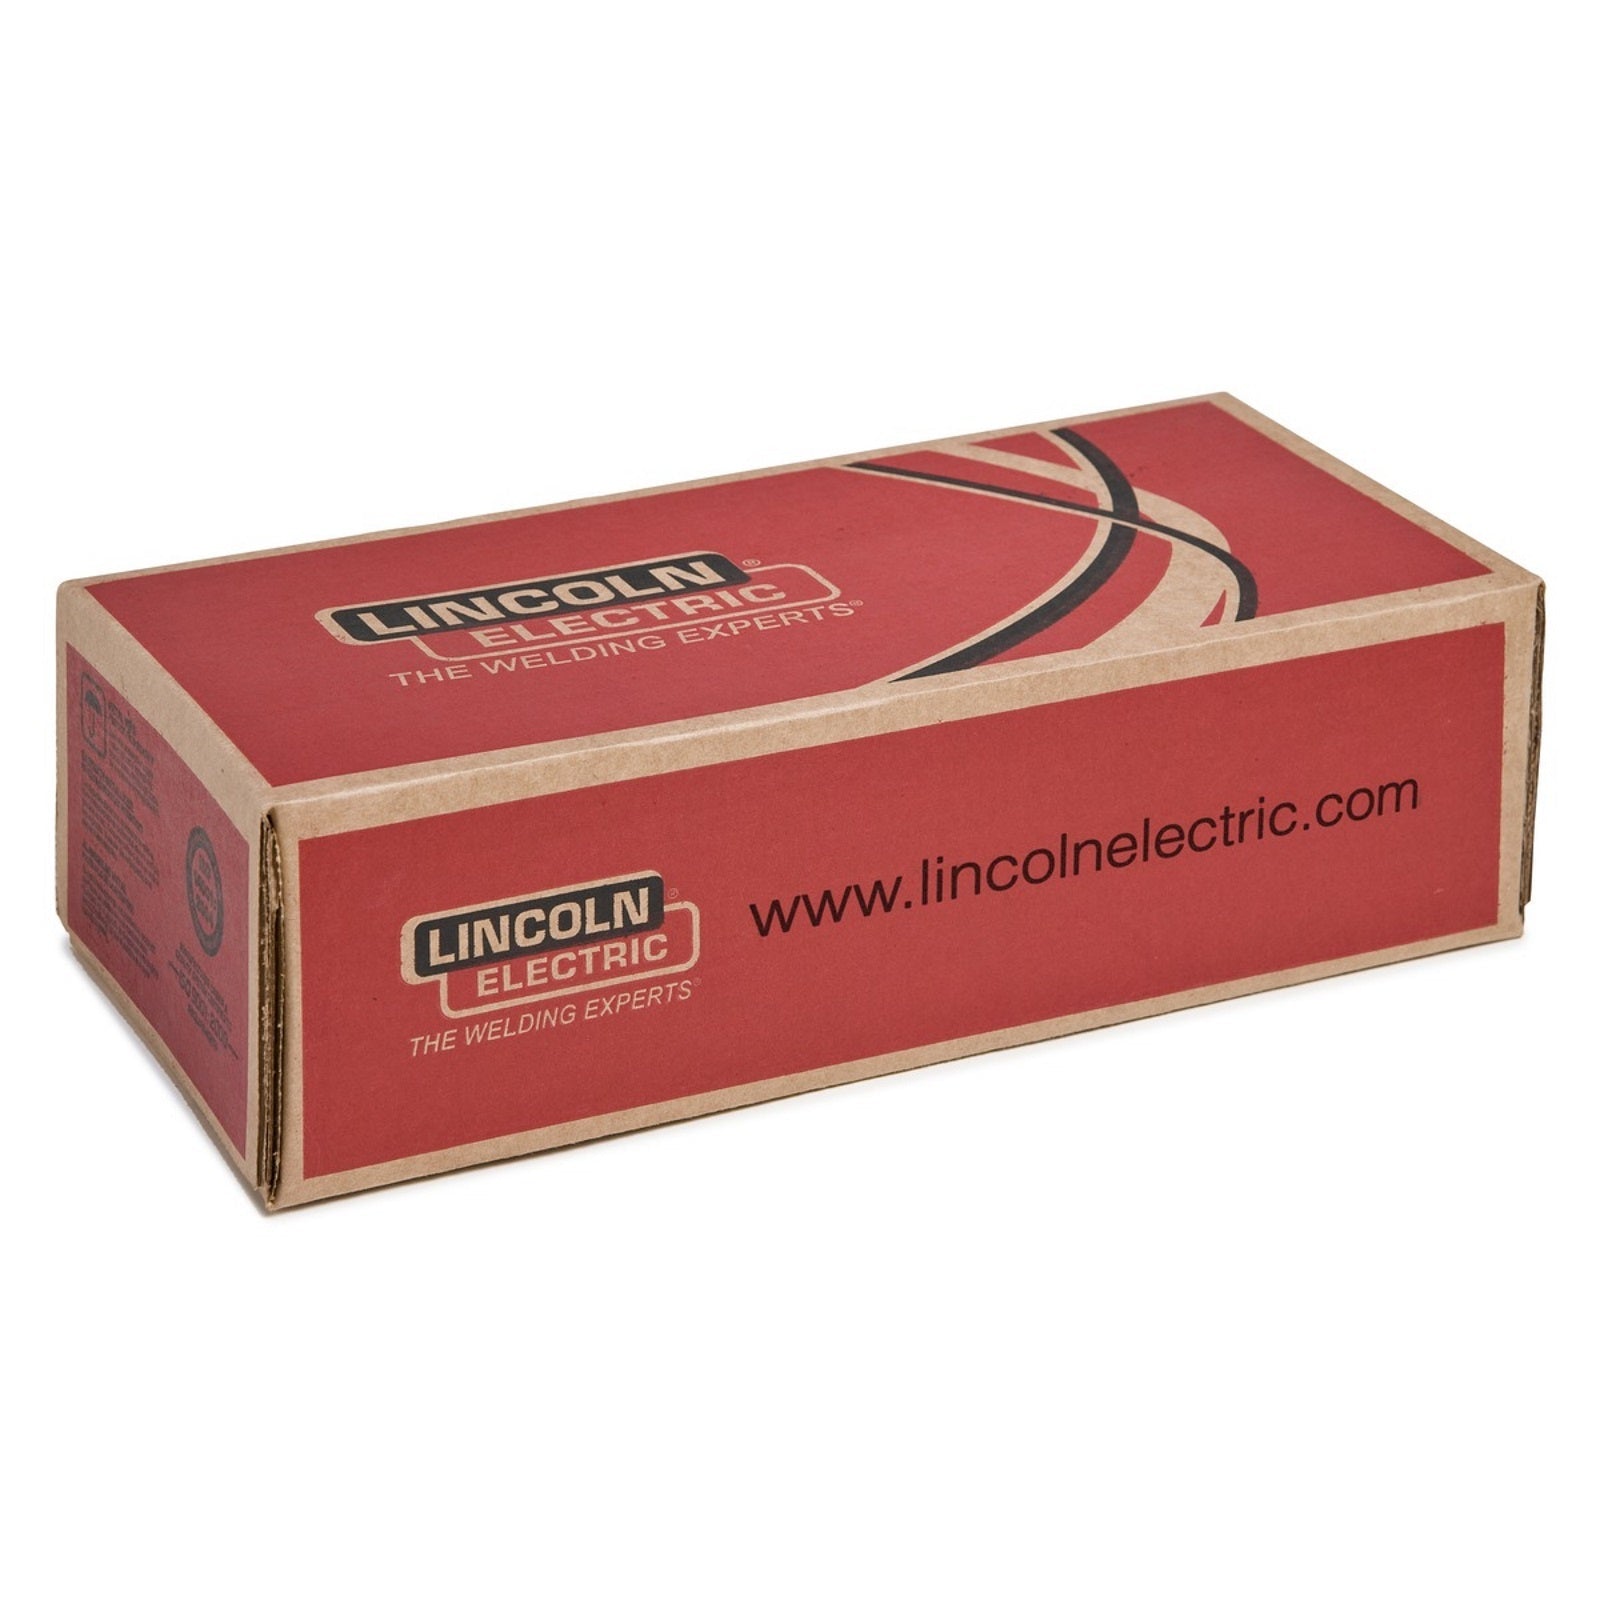 Lincoln Jetweld 1 (7024) 1/8 inch Electrode 50lb Carton (ED010362)